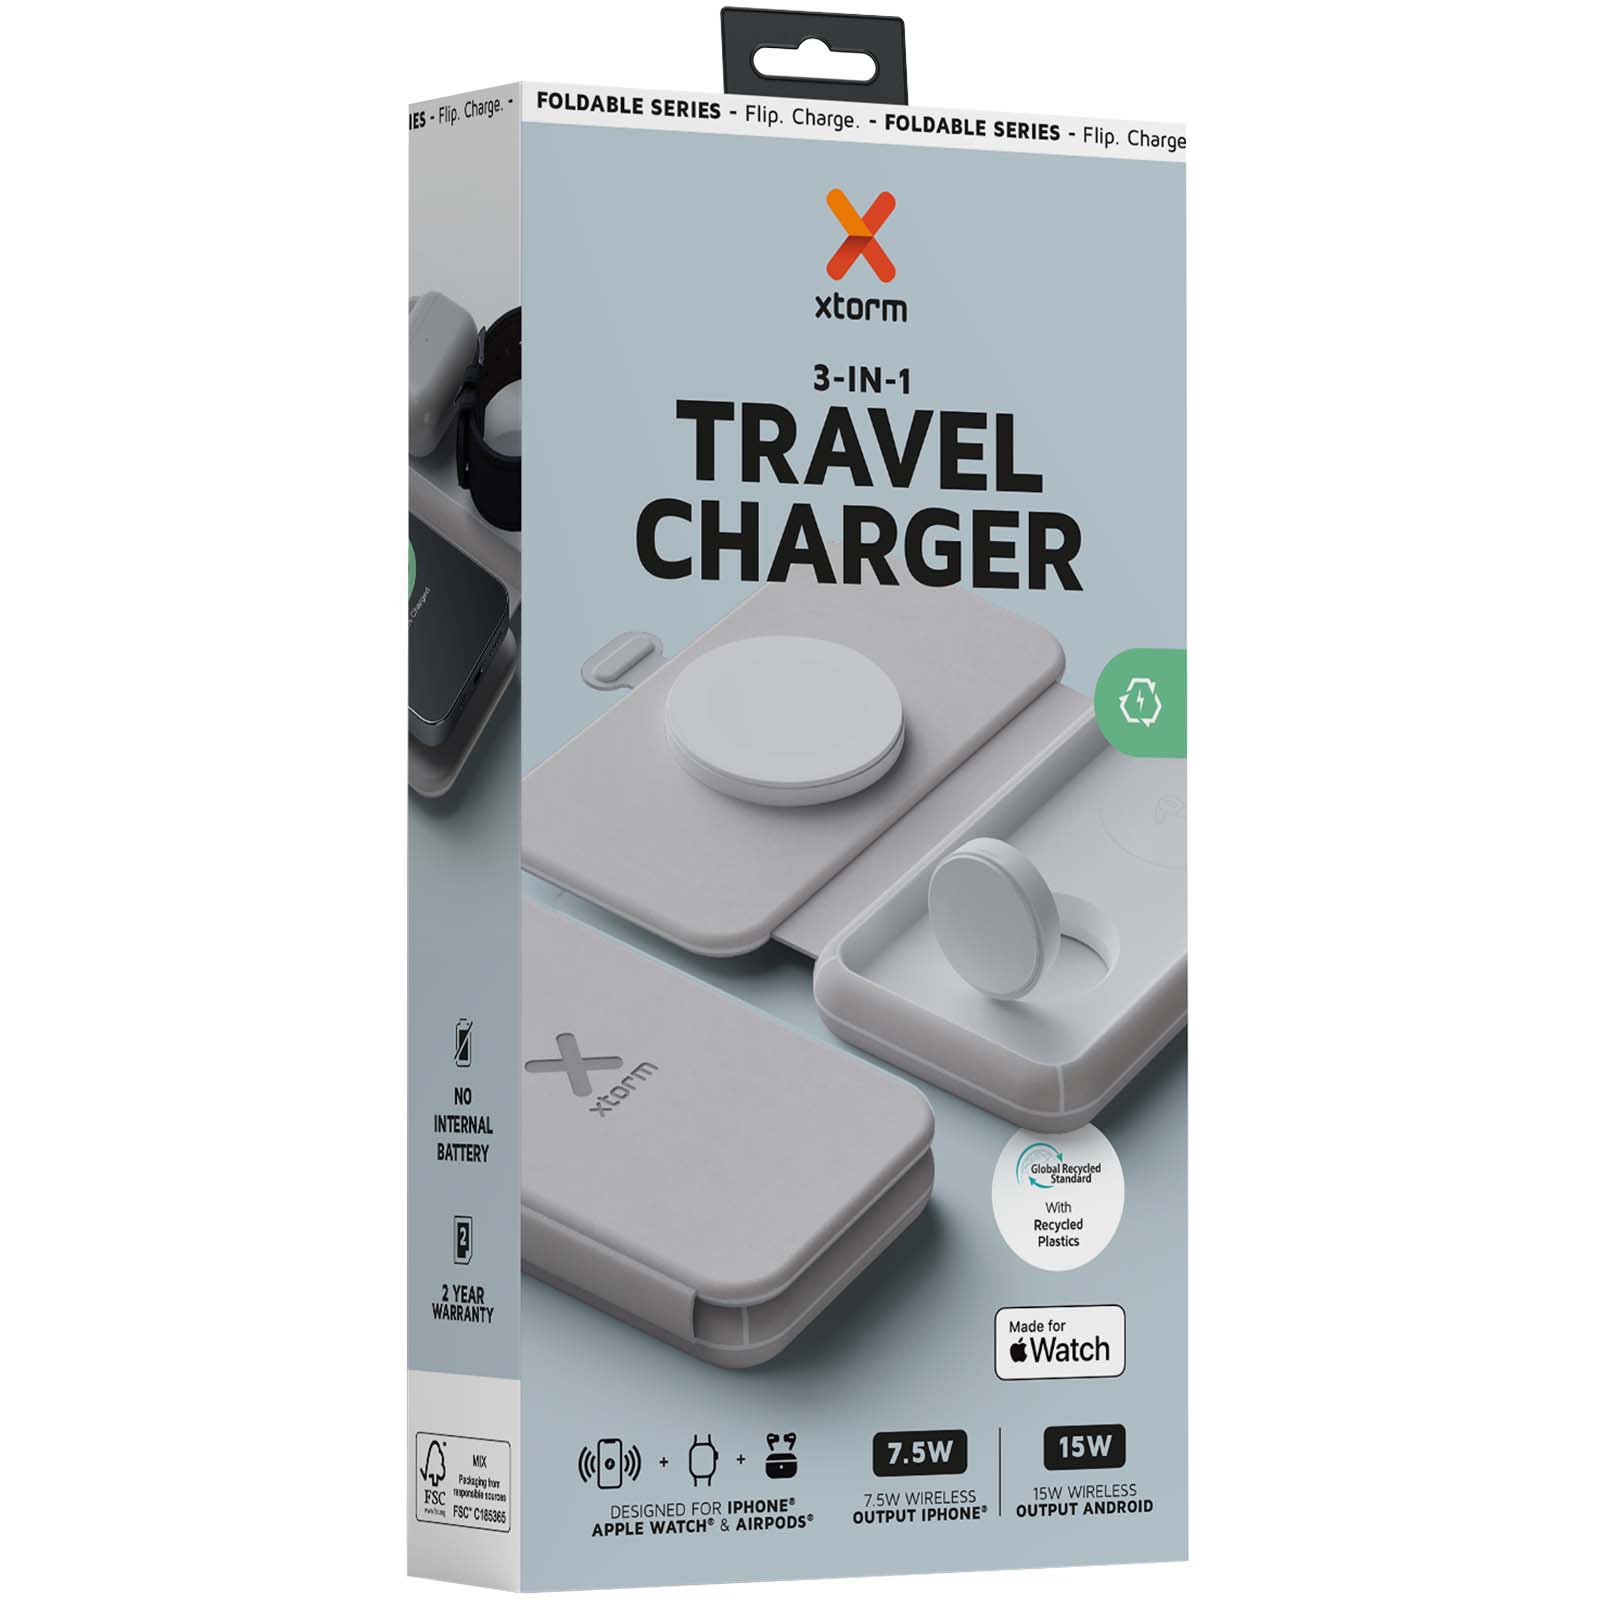 Advertising Wireless Charging - Xtorm XWF31 15W foldable 3-in-1 wireless travel charger - 1